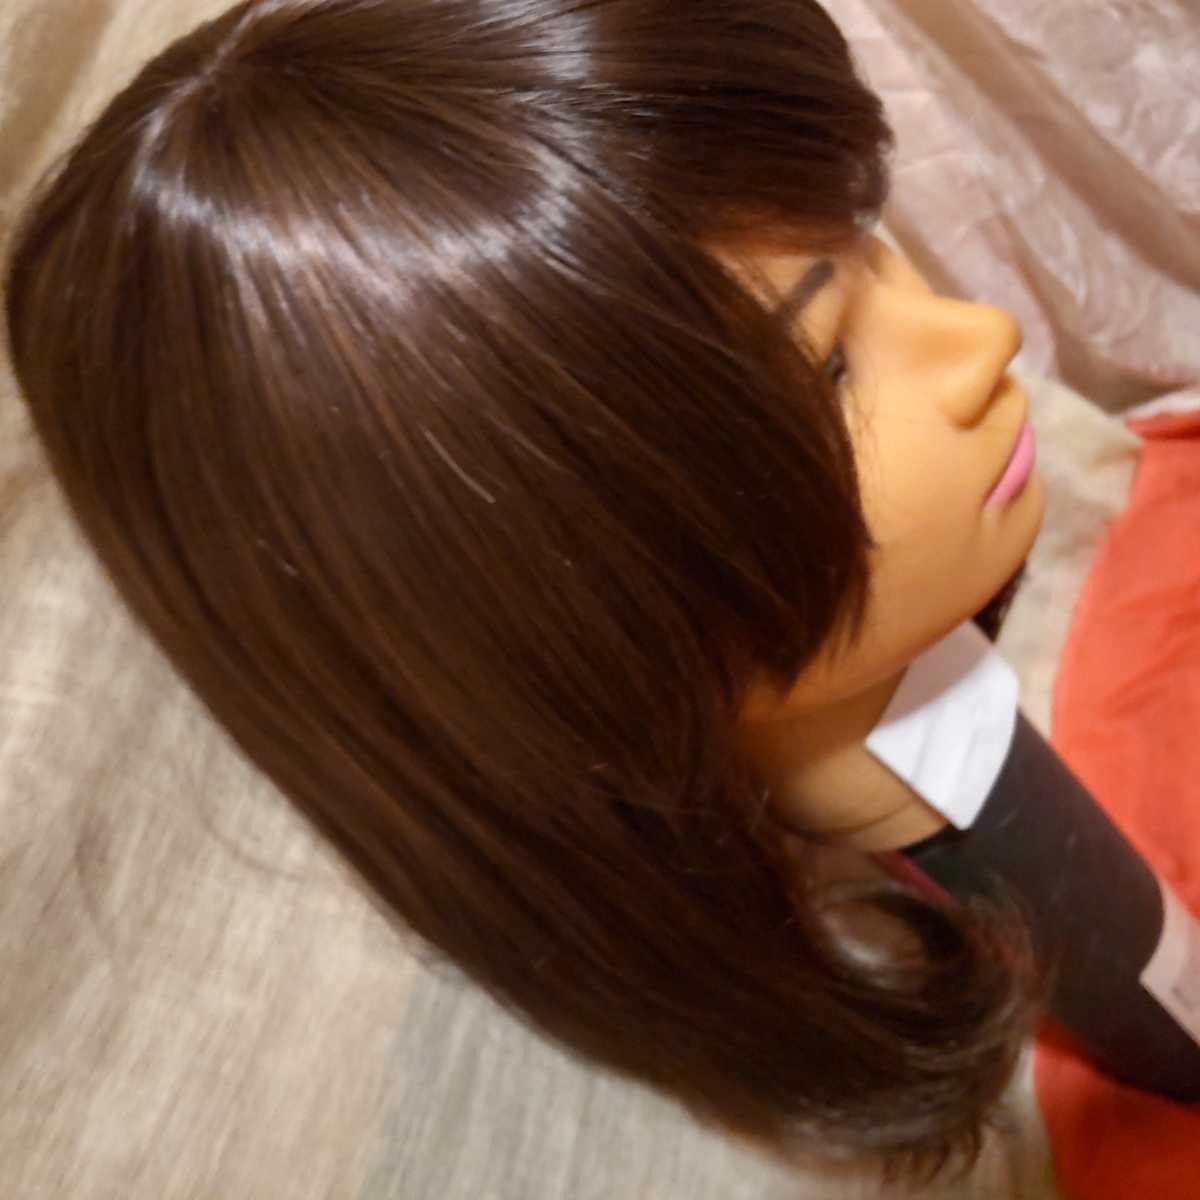  new goods unused full wig Bob meruti mocha Brown wig wig cosplay change equipment including in a package un- possible 